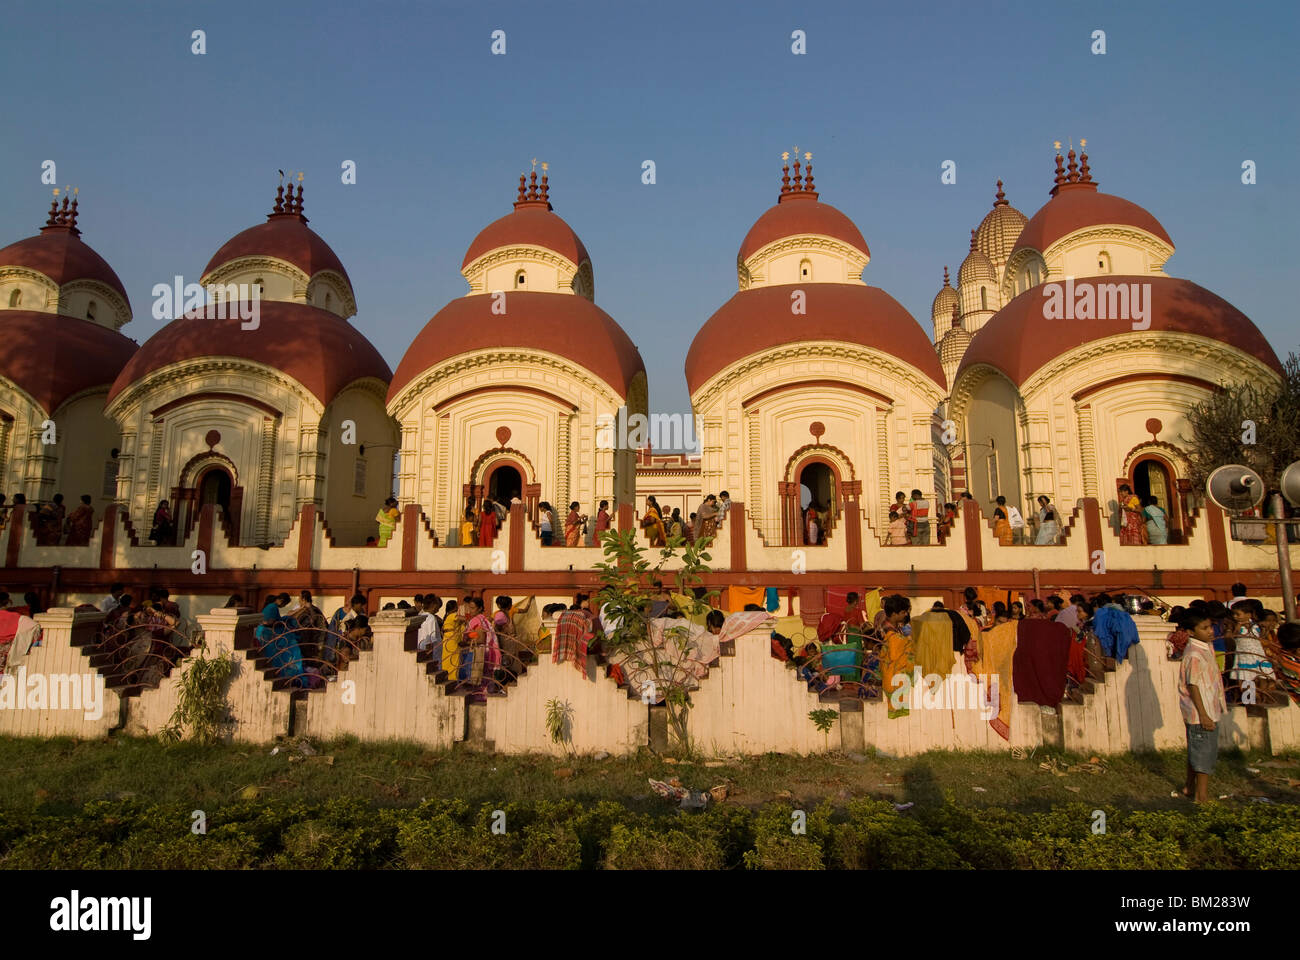 Crowds of people in front of Kali Temple, Kolkata, West Bengal, India, Asia Stock Photo